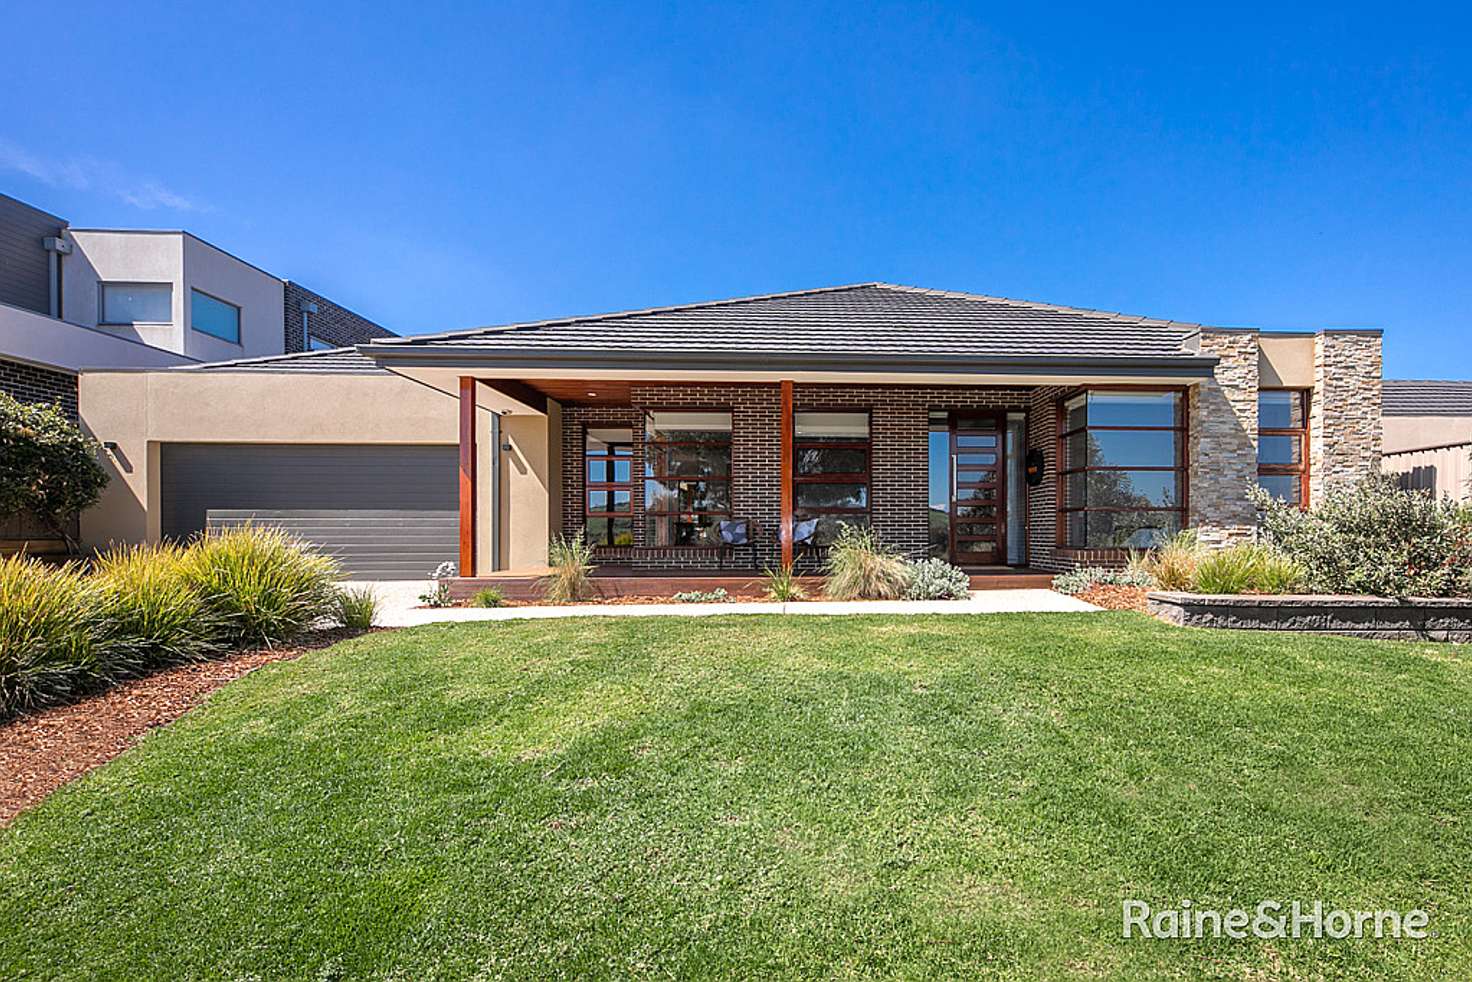 Main view of Homely house listing, 14 Earlington Crescent, Sunbury VIC 3429